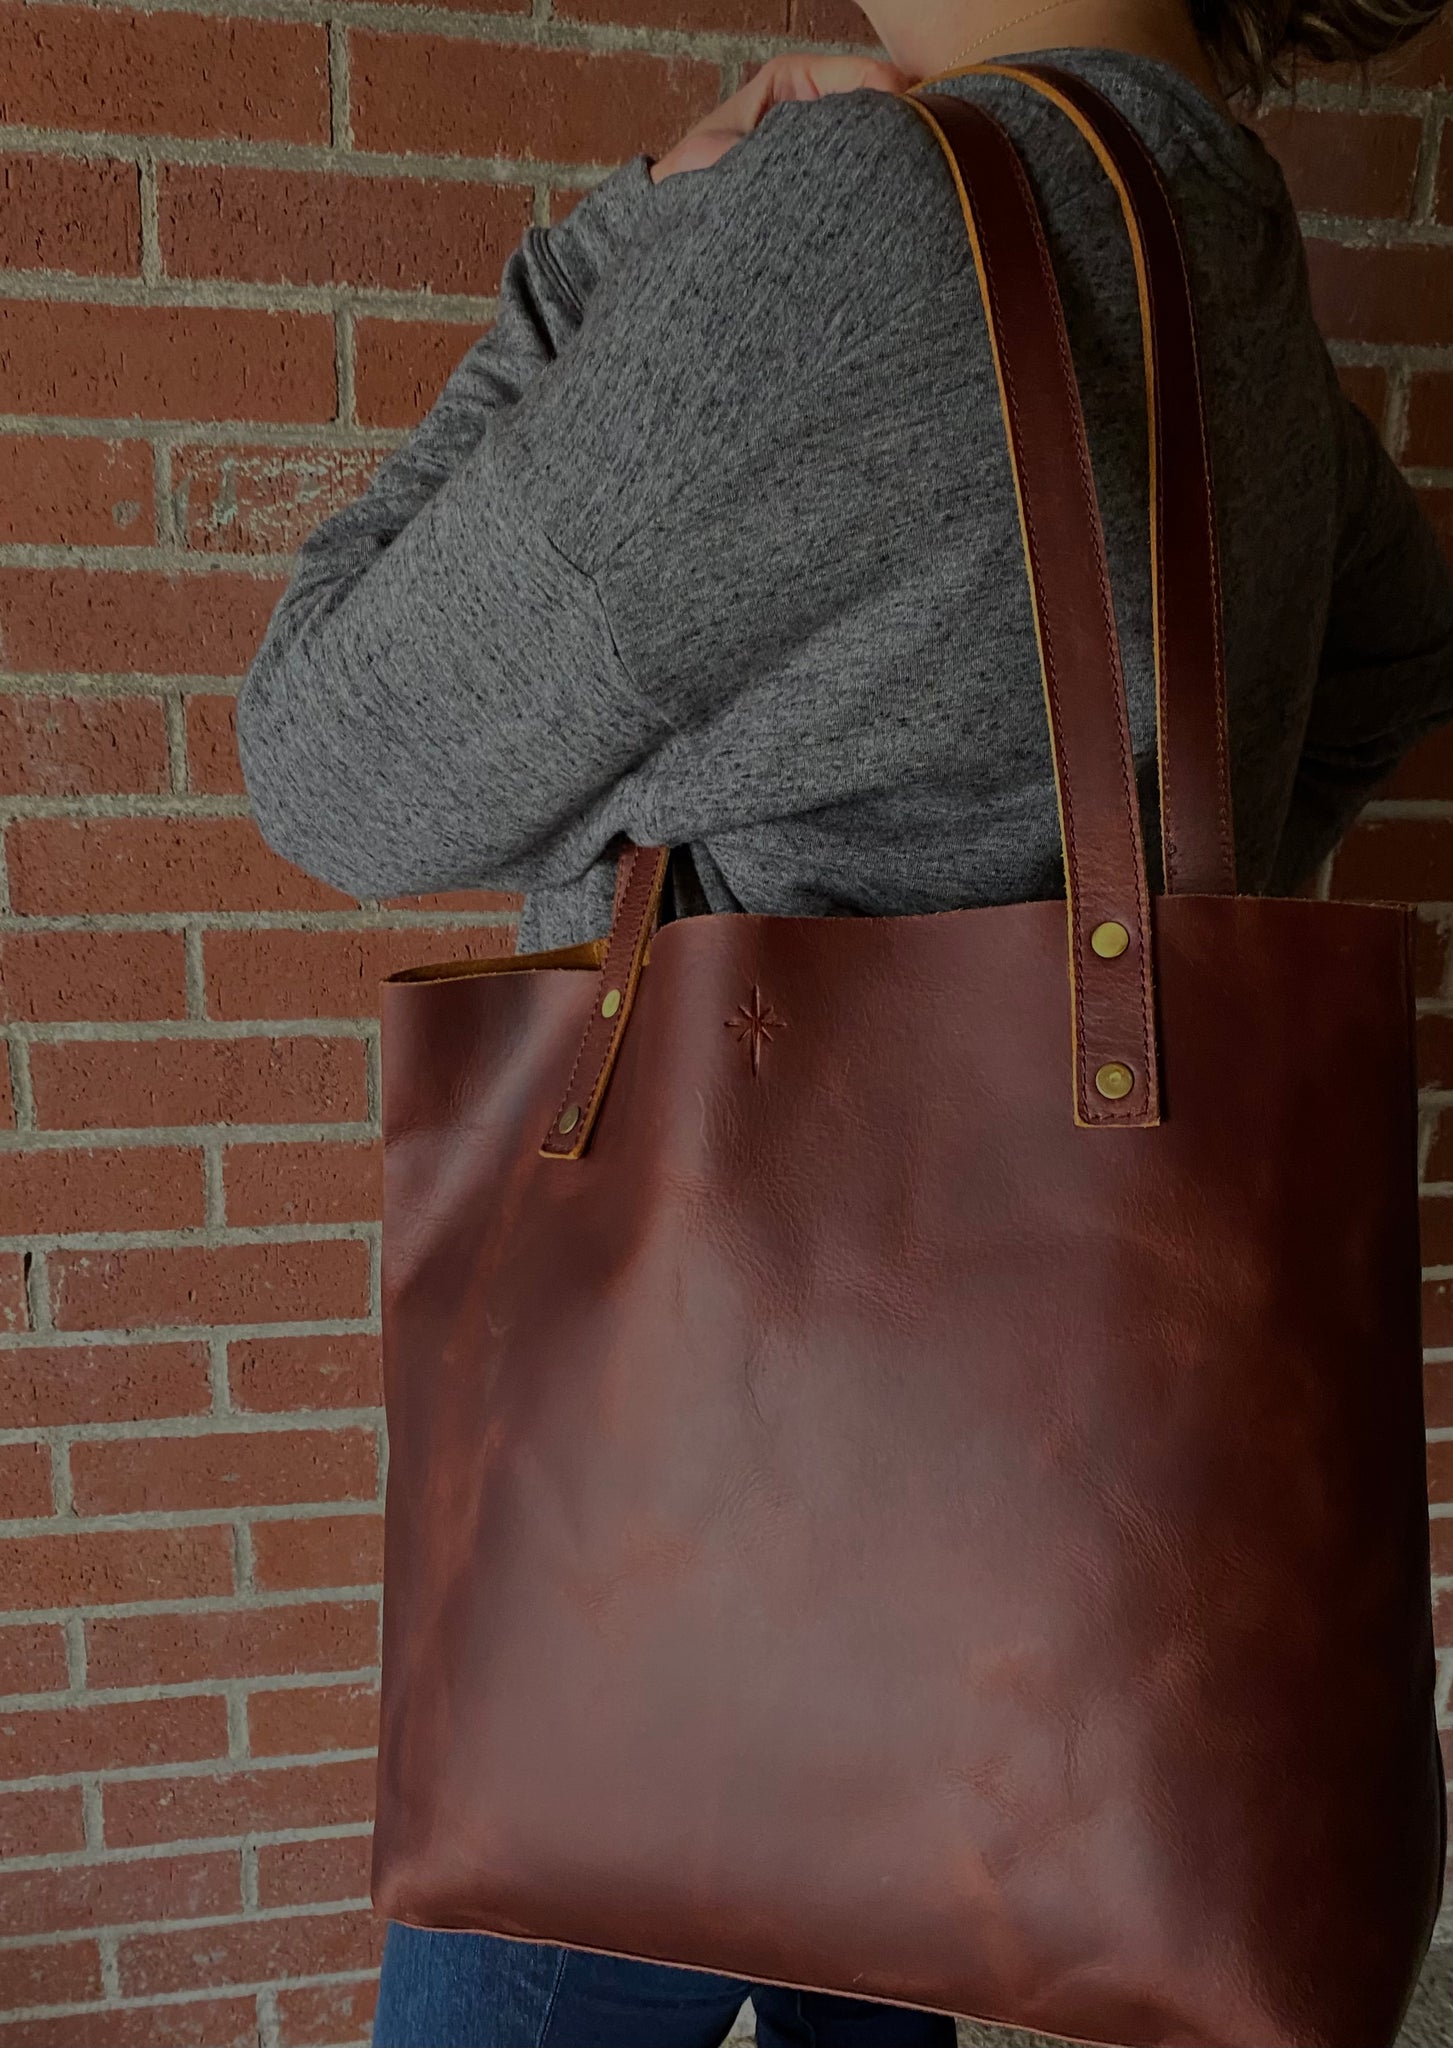 Girl with brown leather tote bag on shoulder, top of bag starts  just above waist